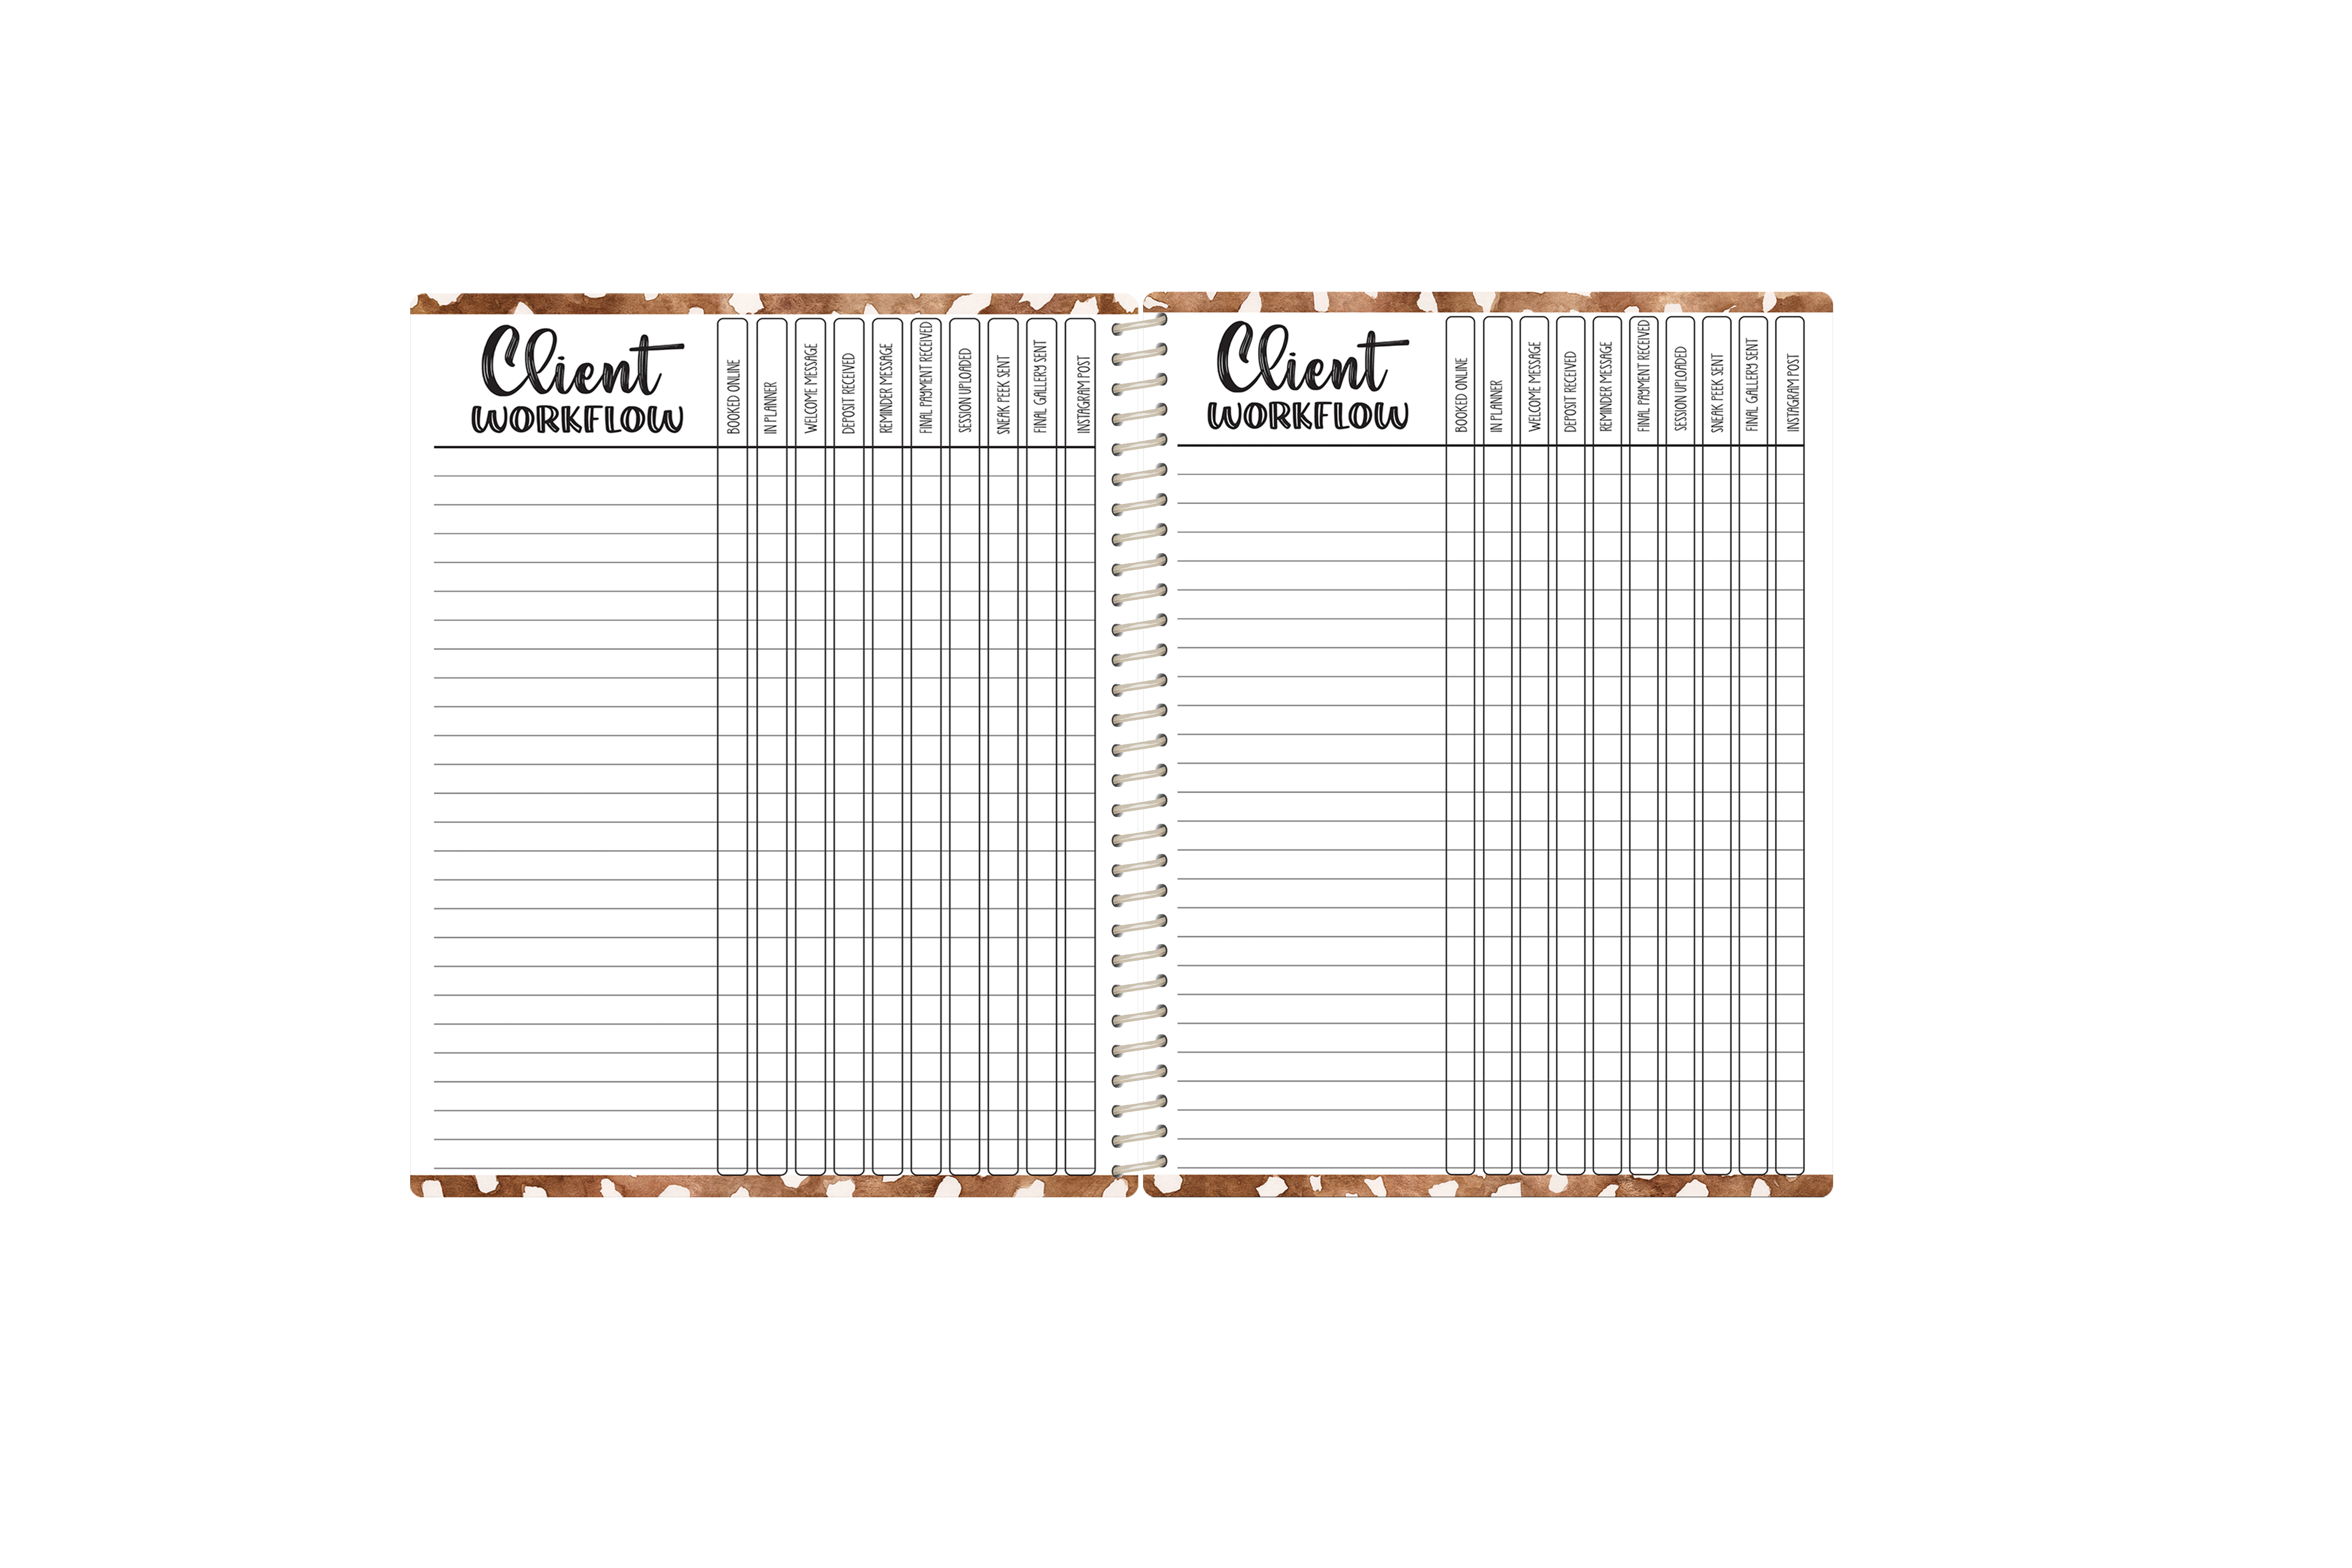 Photography Appointment Book - BW BUFFALO PLAID